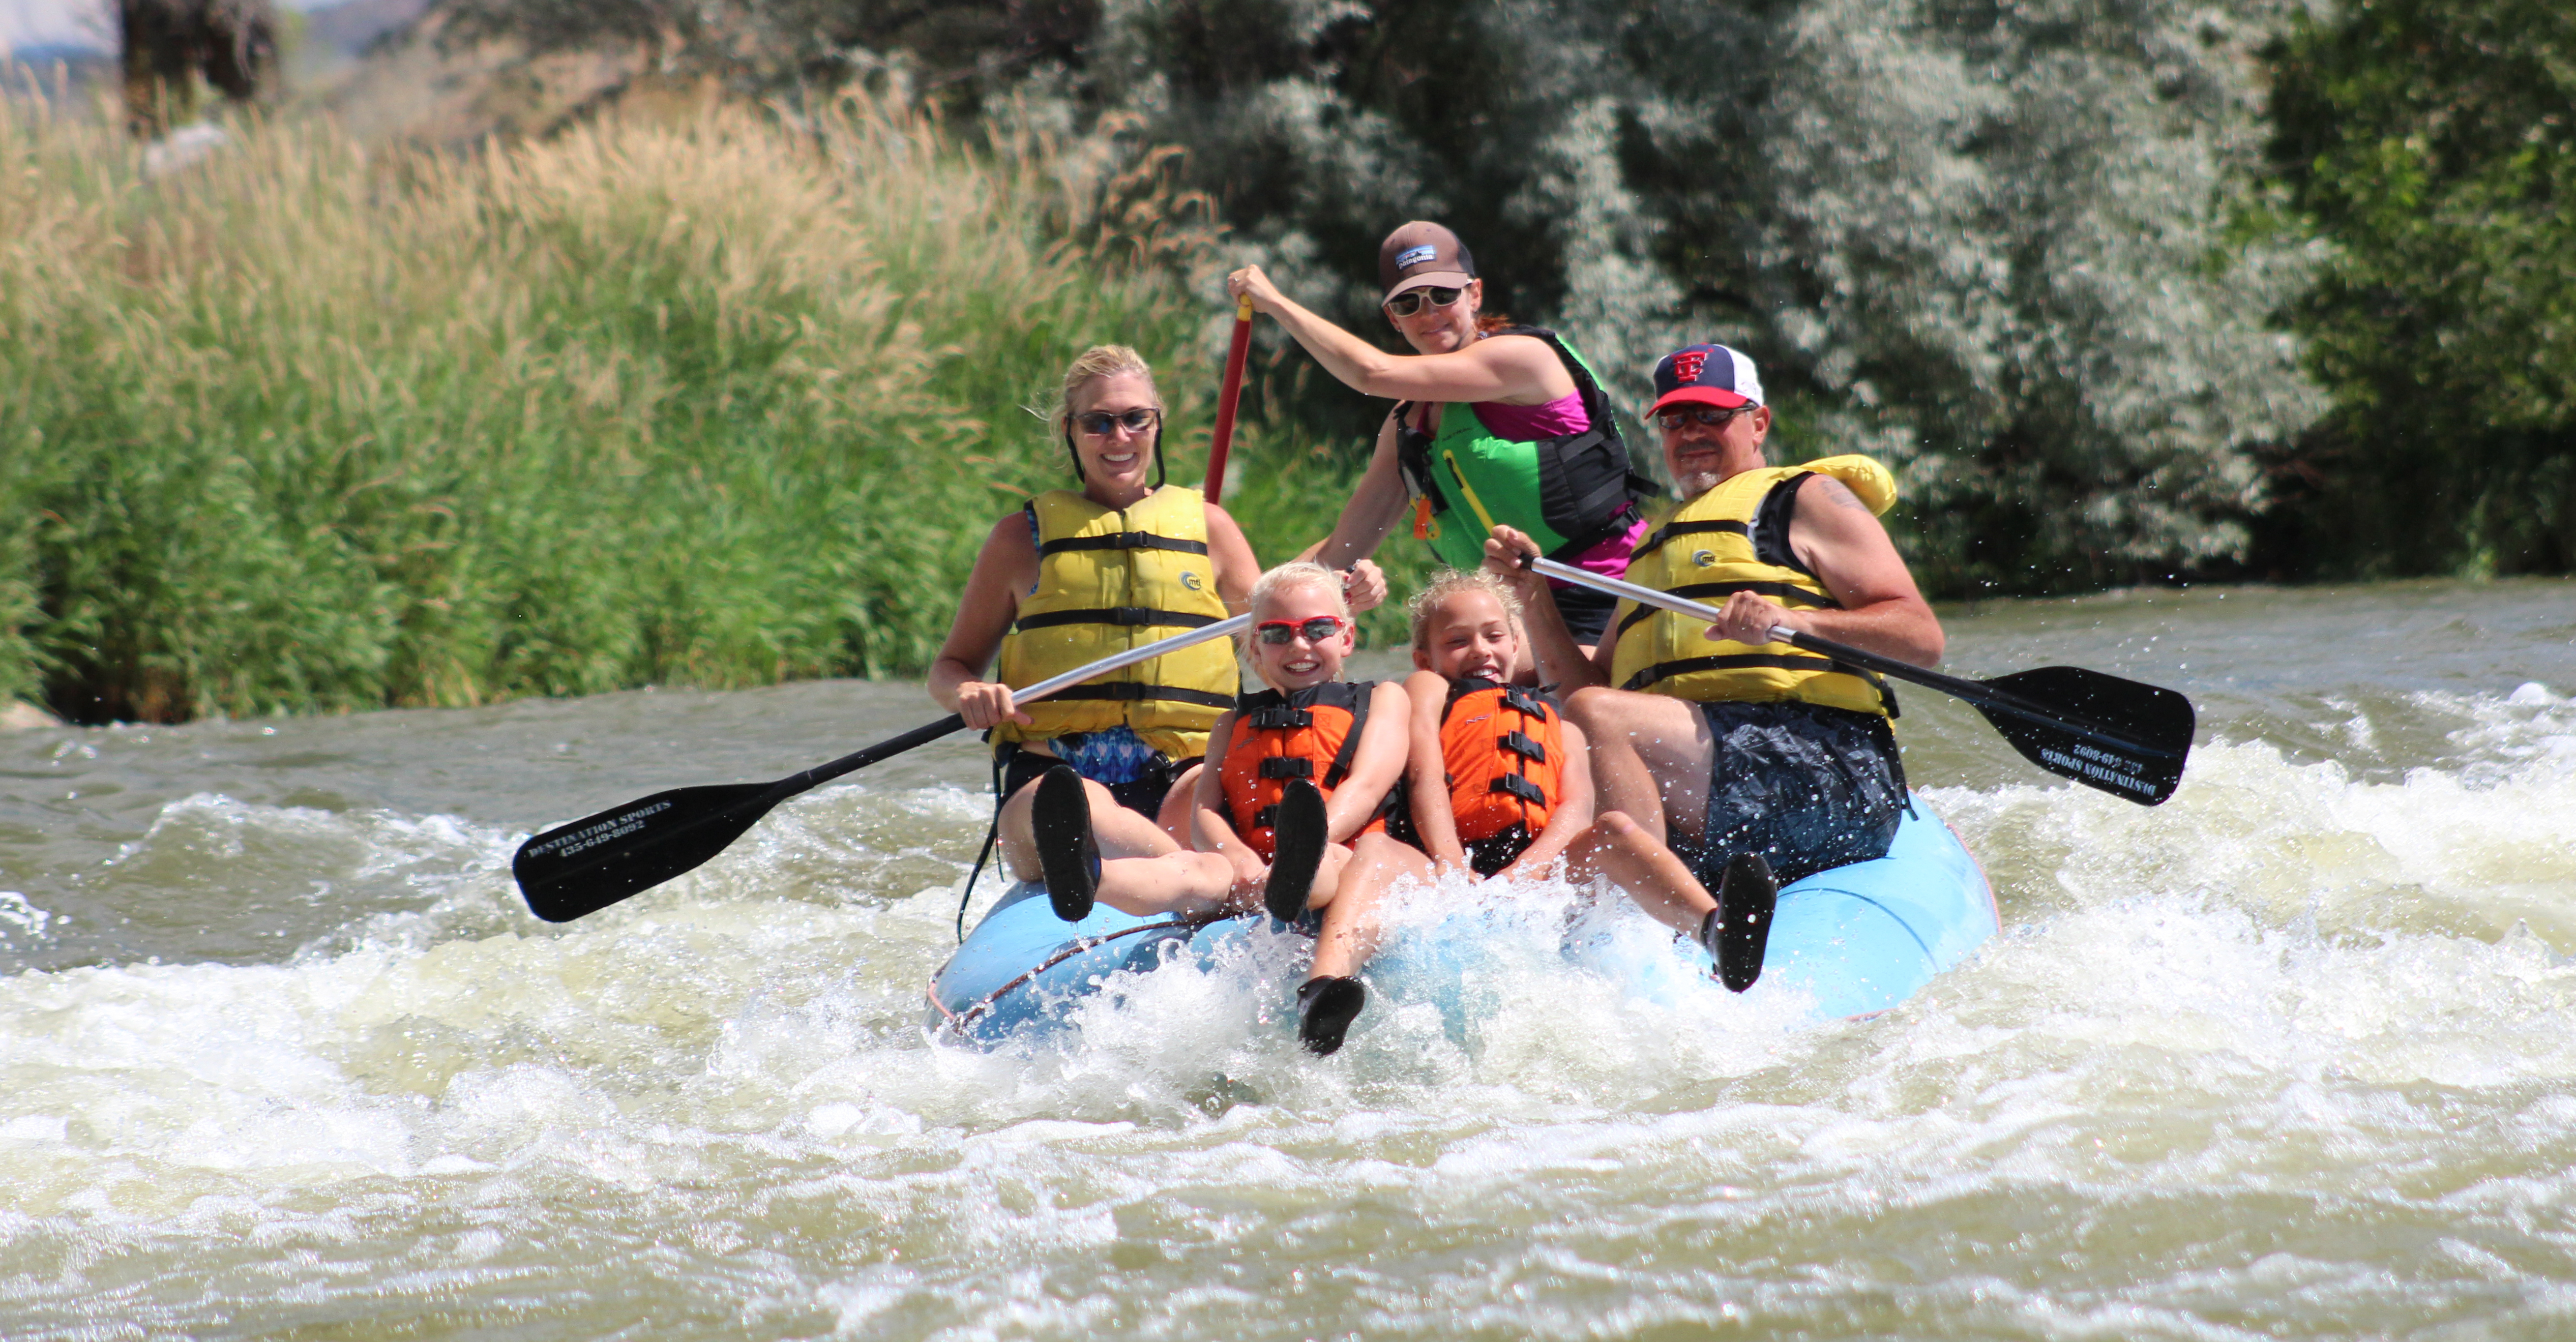 Class II mild whitewater river rafting